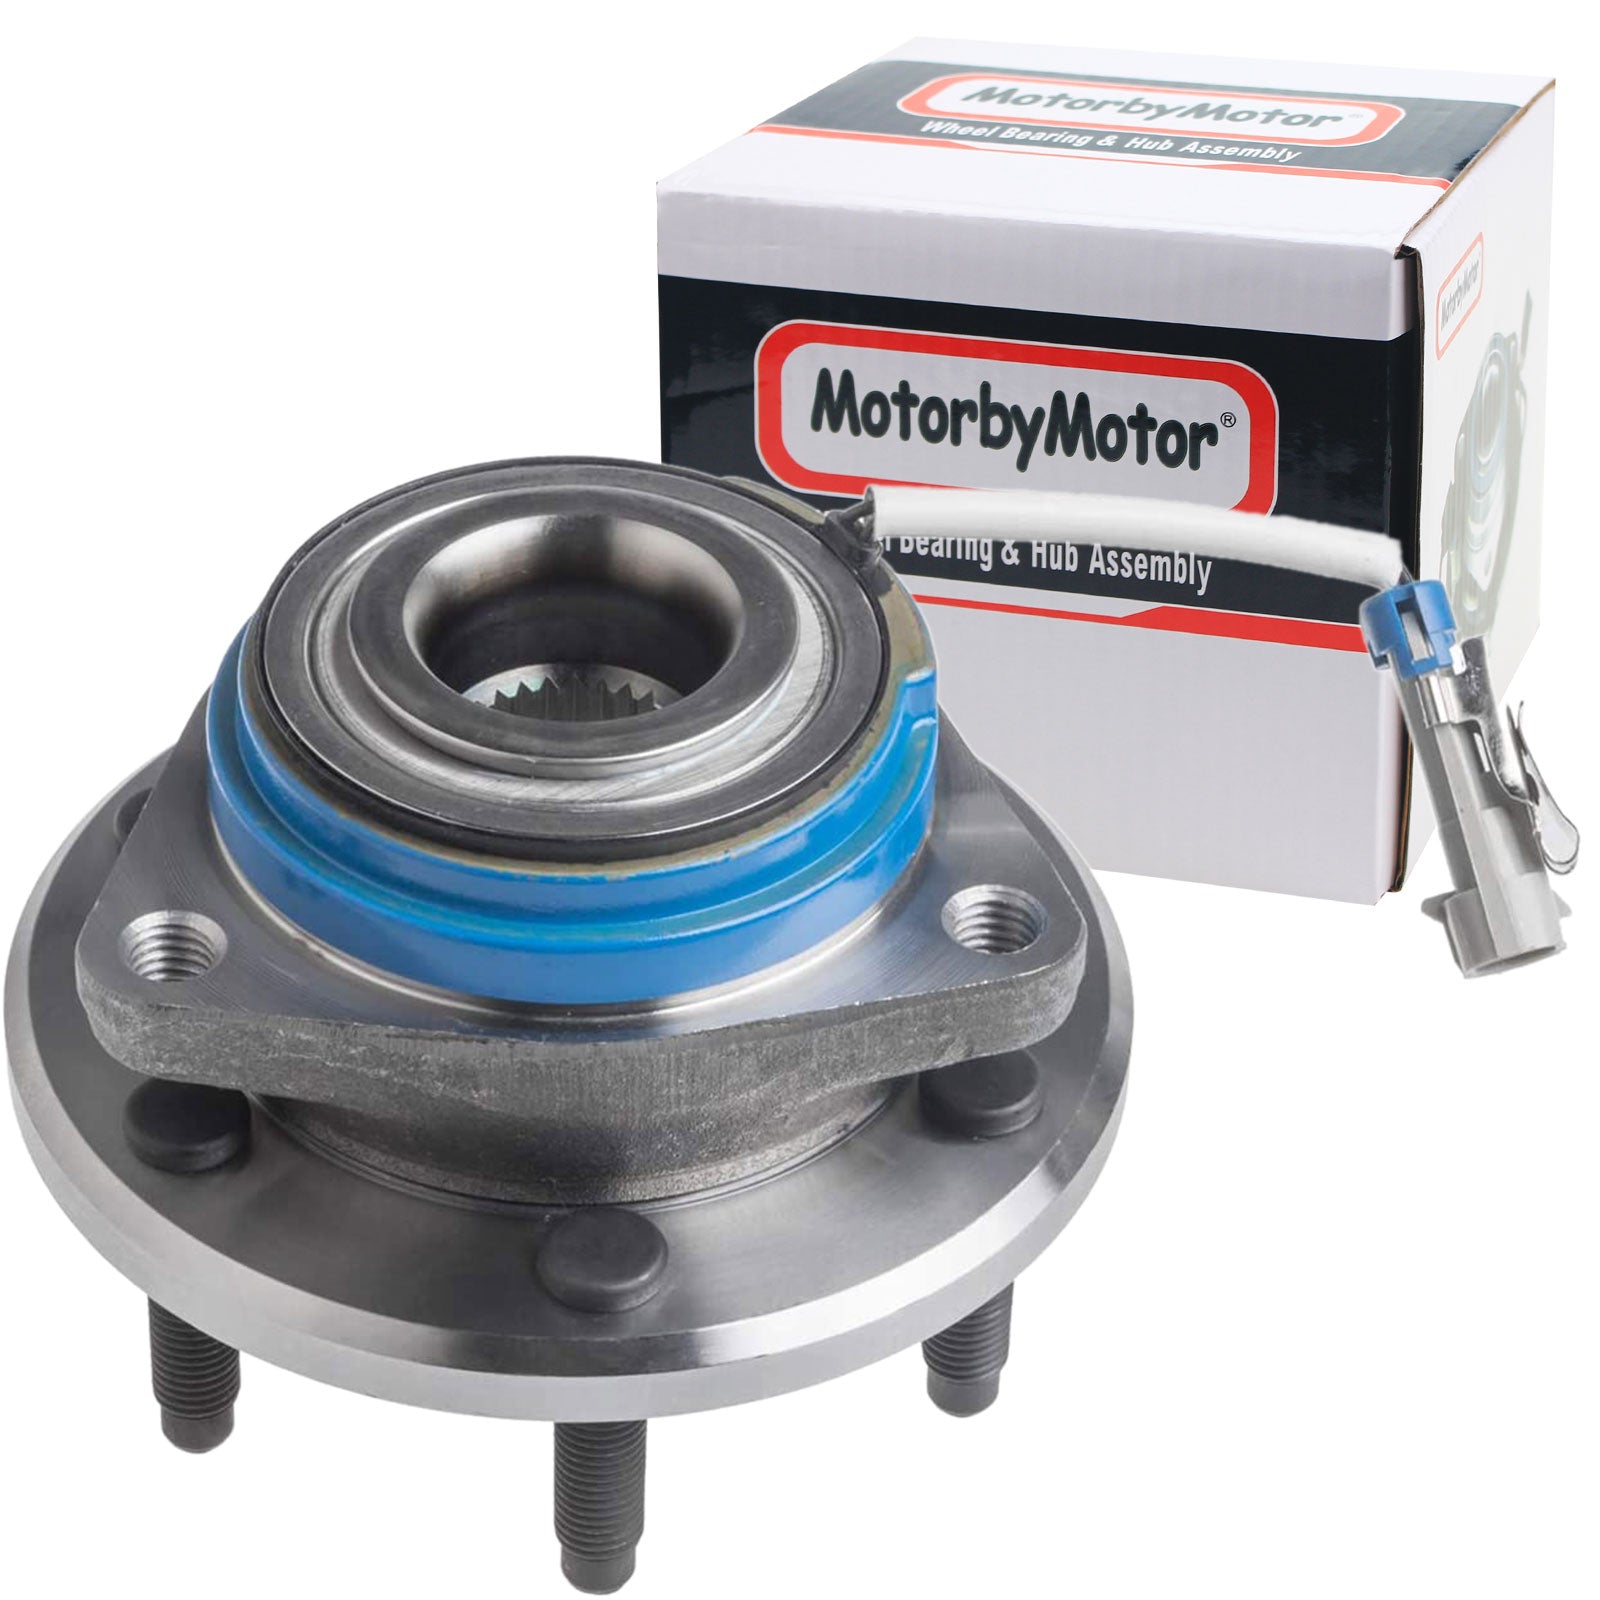 MotorbyMotor 512243 Rear Wheel Bearing Hub Assembly with 6 Lugs 04-07 Cadillac CTS, 05-11 Cadillac STS (RWD), 04-09 Cadillac SRX Low-Runout OE Directly Replacement w/ABS MotorbyMotor